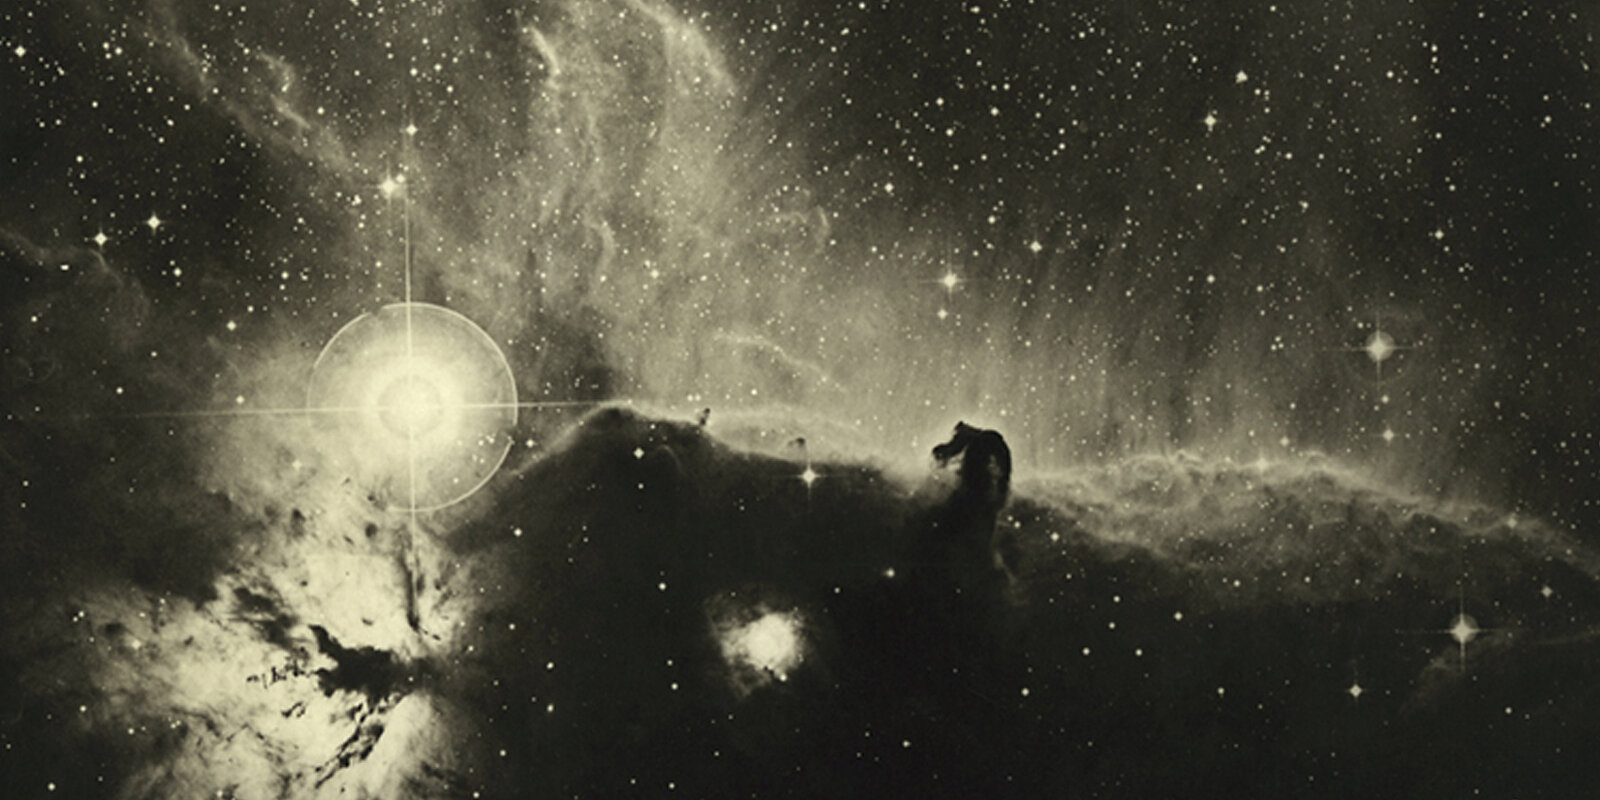 Detail view, David Malin, Dust and Gas Adrift in Orion, undated